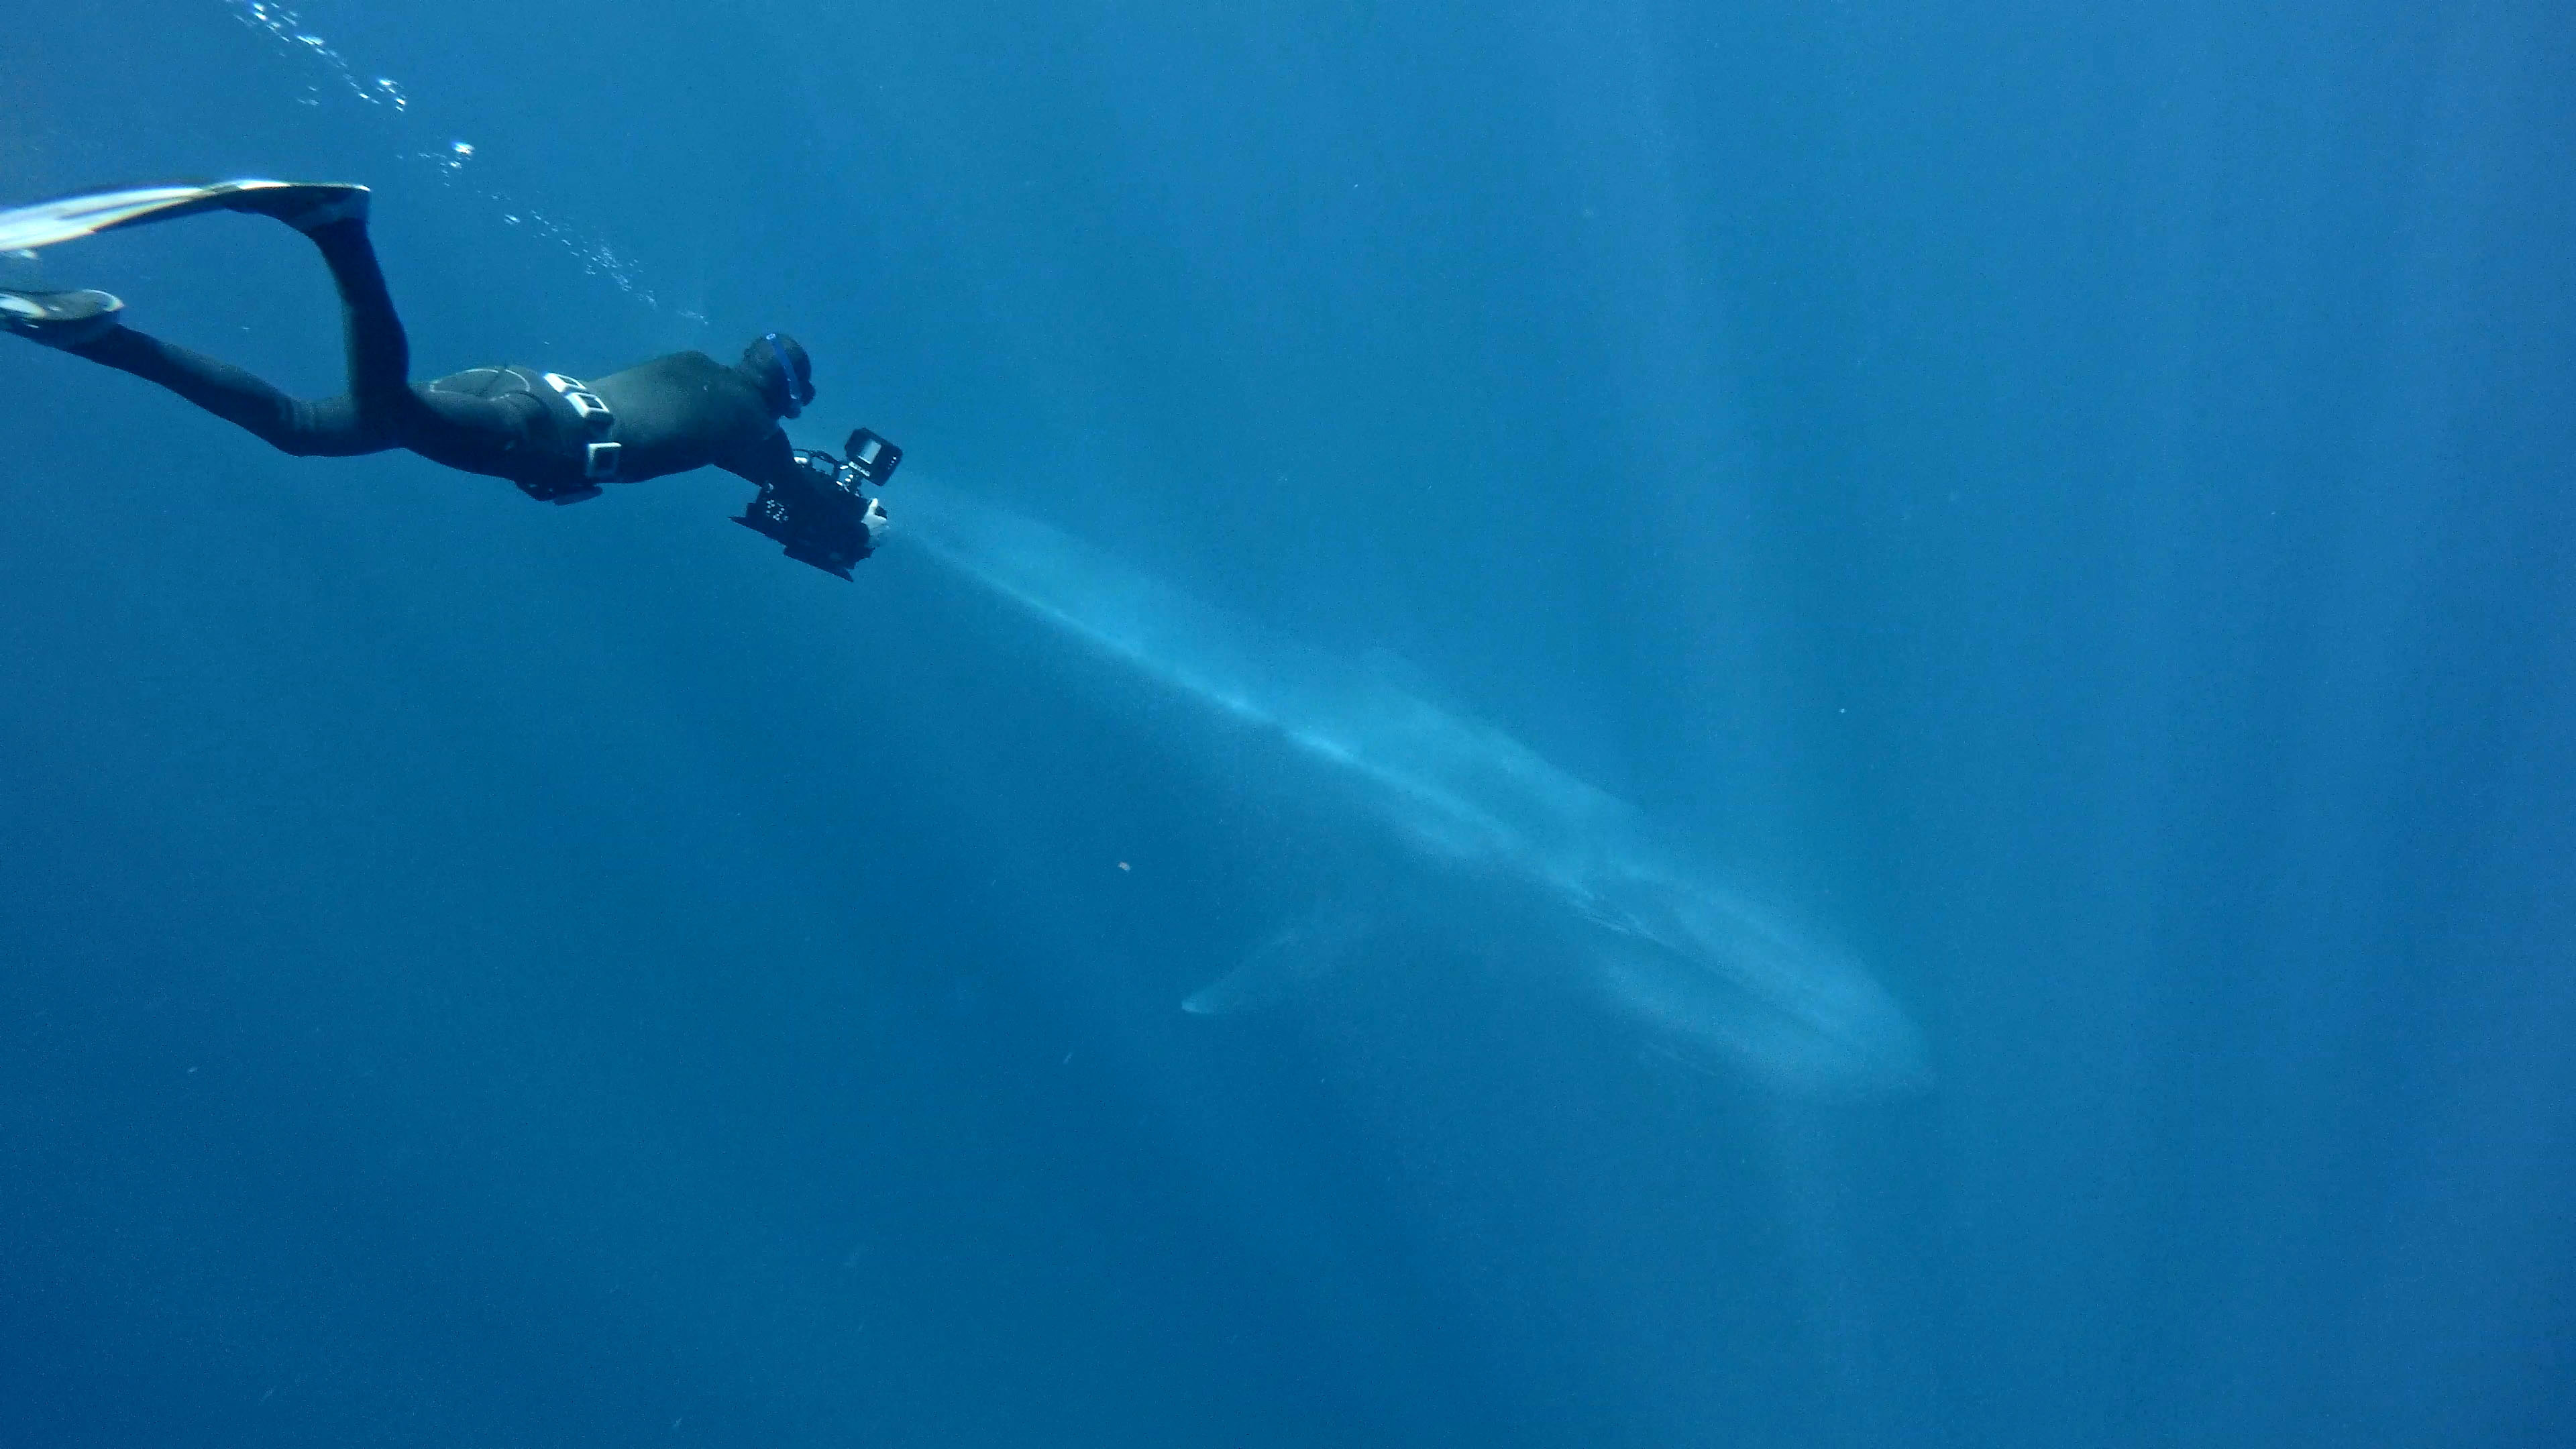 Ken free diving to a blue whale 2